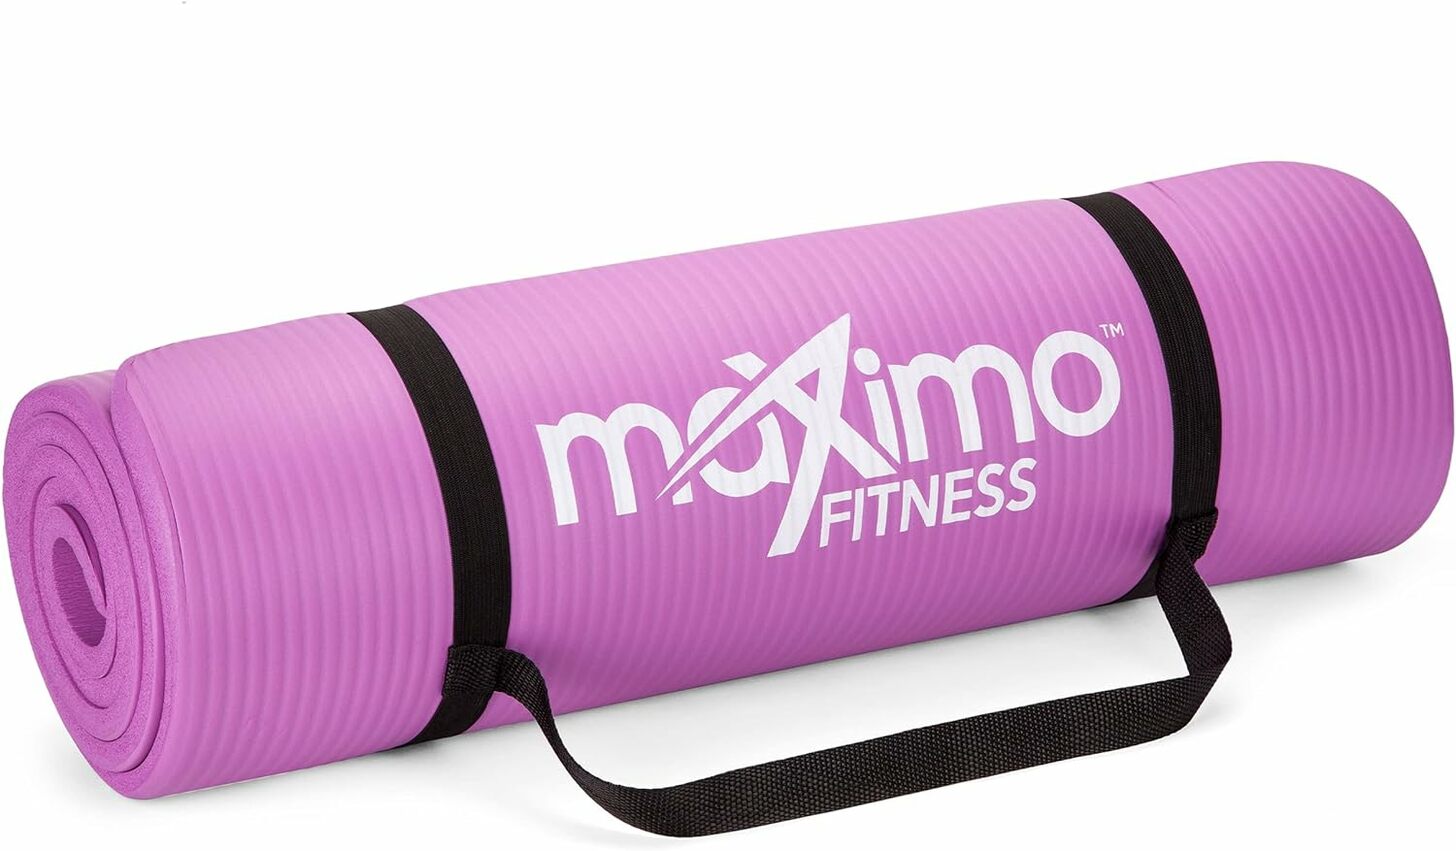 The best thick yoga mat